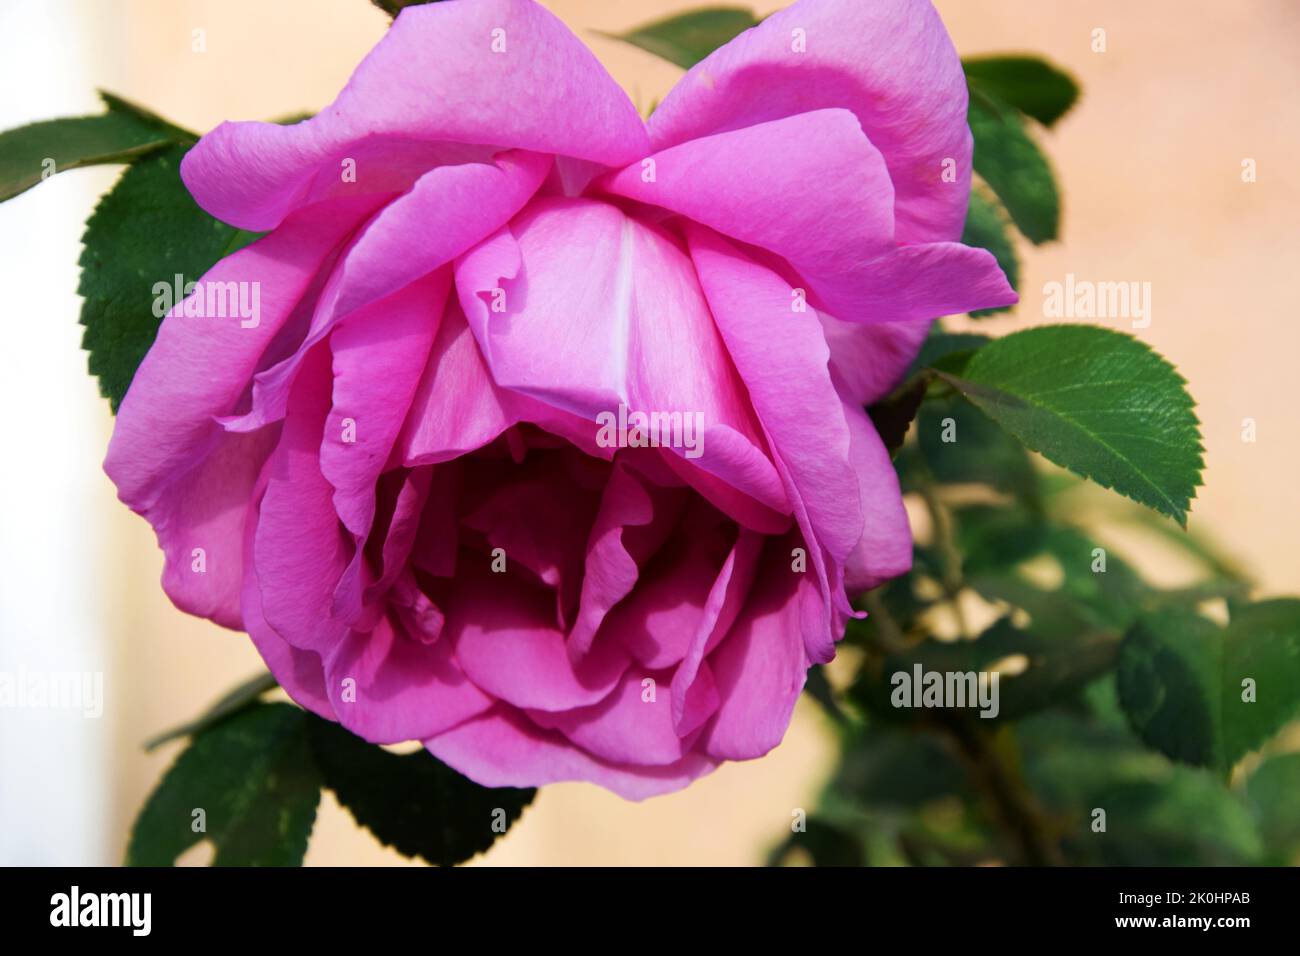 The close-up view of a Rosa 'Mainzer Fastnacht' flower bulb with green leaves Stock Photo